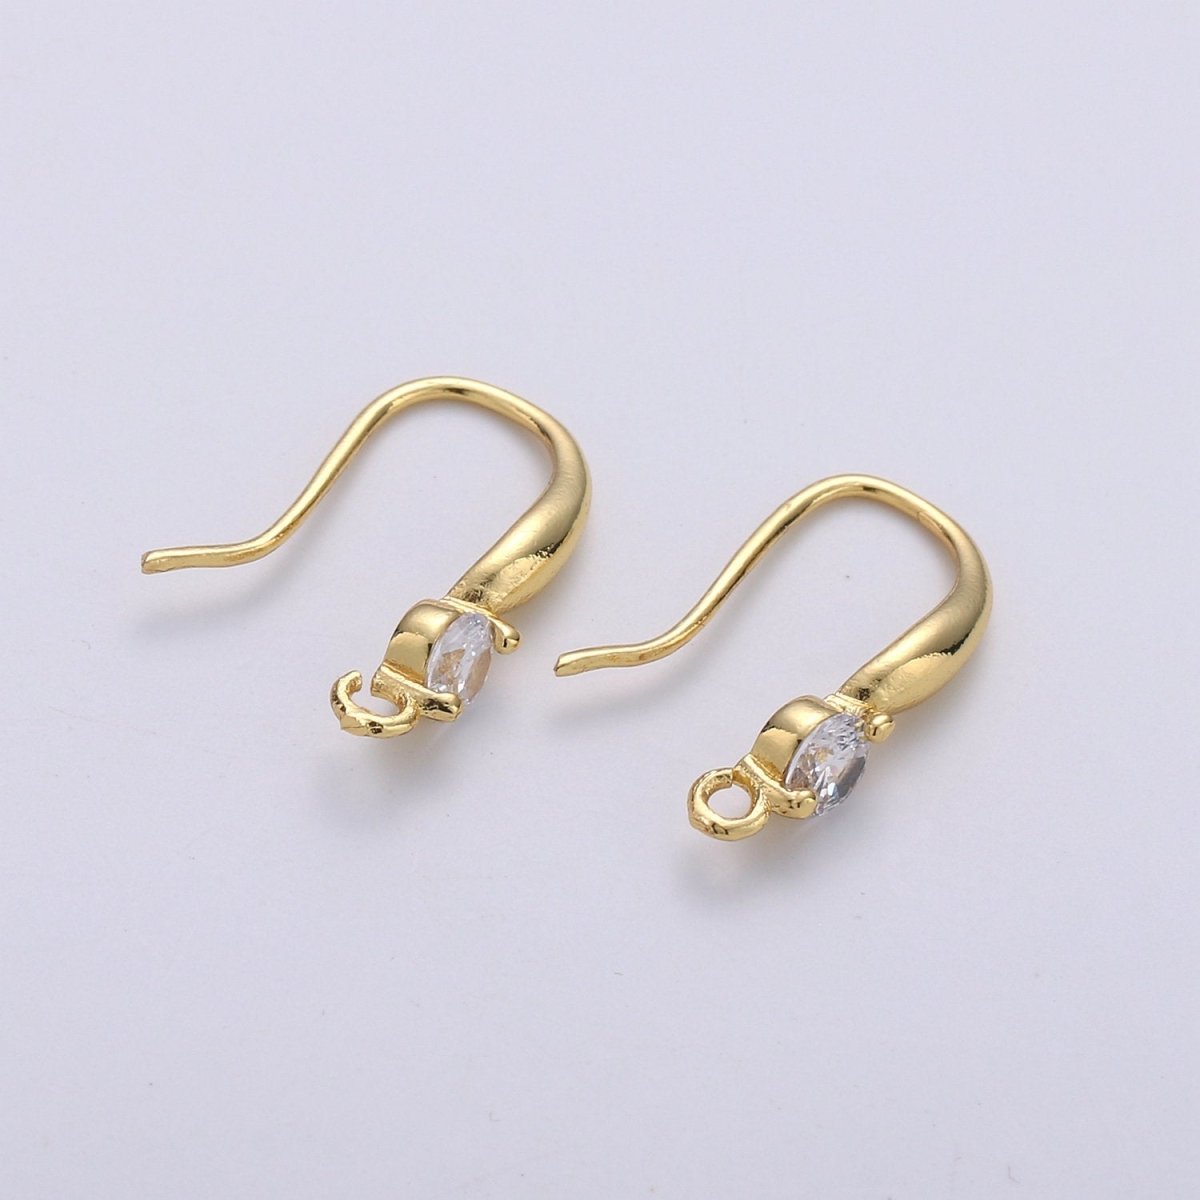 French Hook Earrings in Gold, French Hook Earrings / Gold Hook Ear Wires w/ Cz / French Hook / Earrings Craft K-822 K-823 - DLUXCA